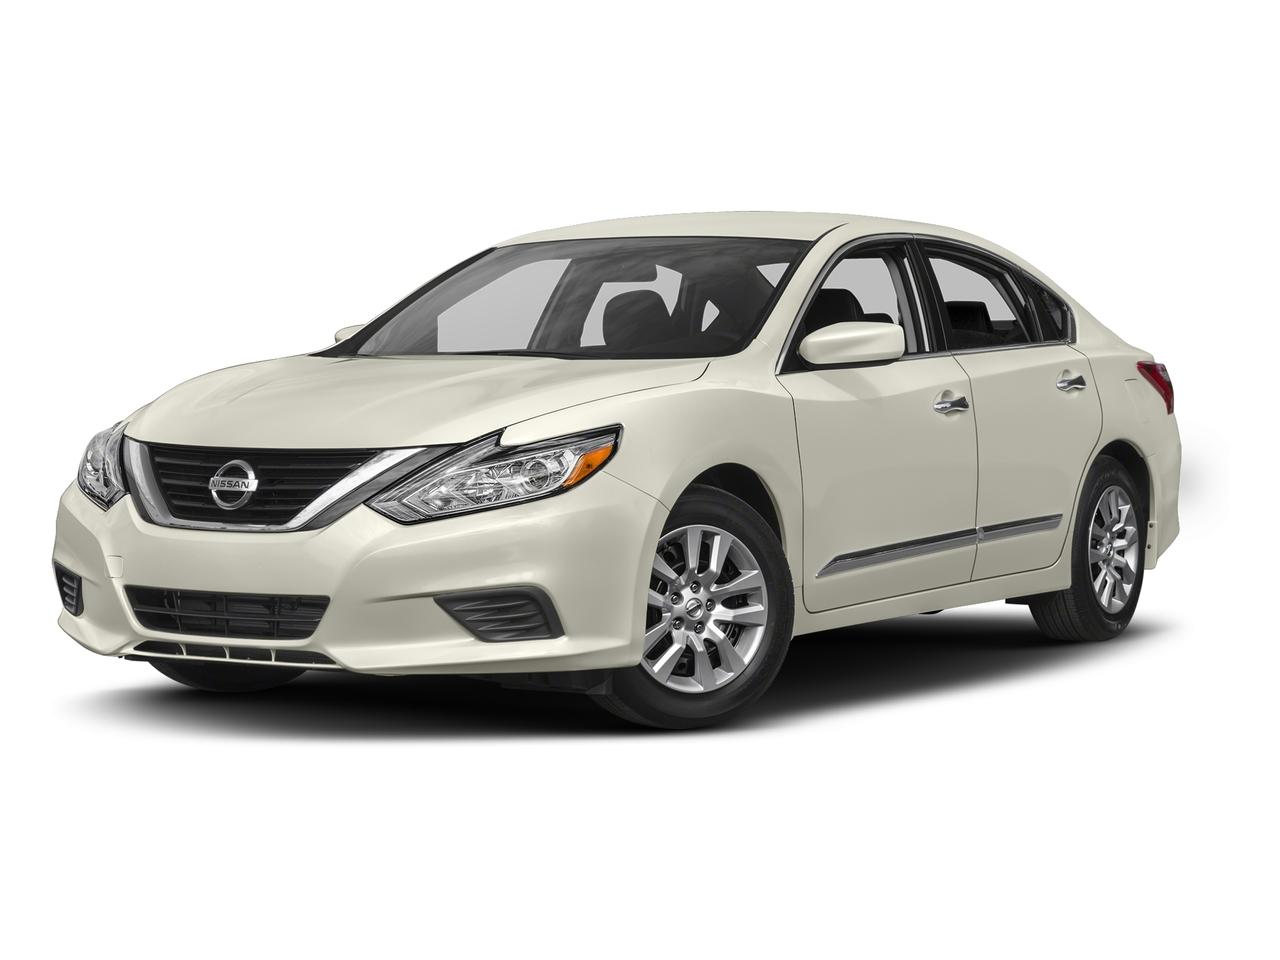 2017 Nissan Altima Vehicle Photo in Grapevine, TX 76051